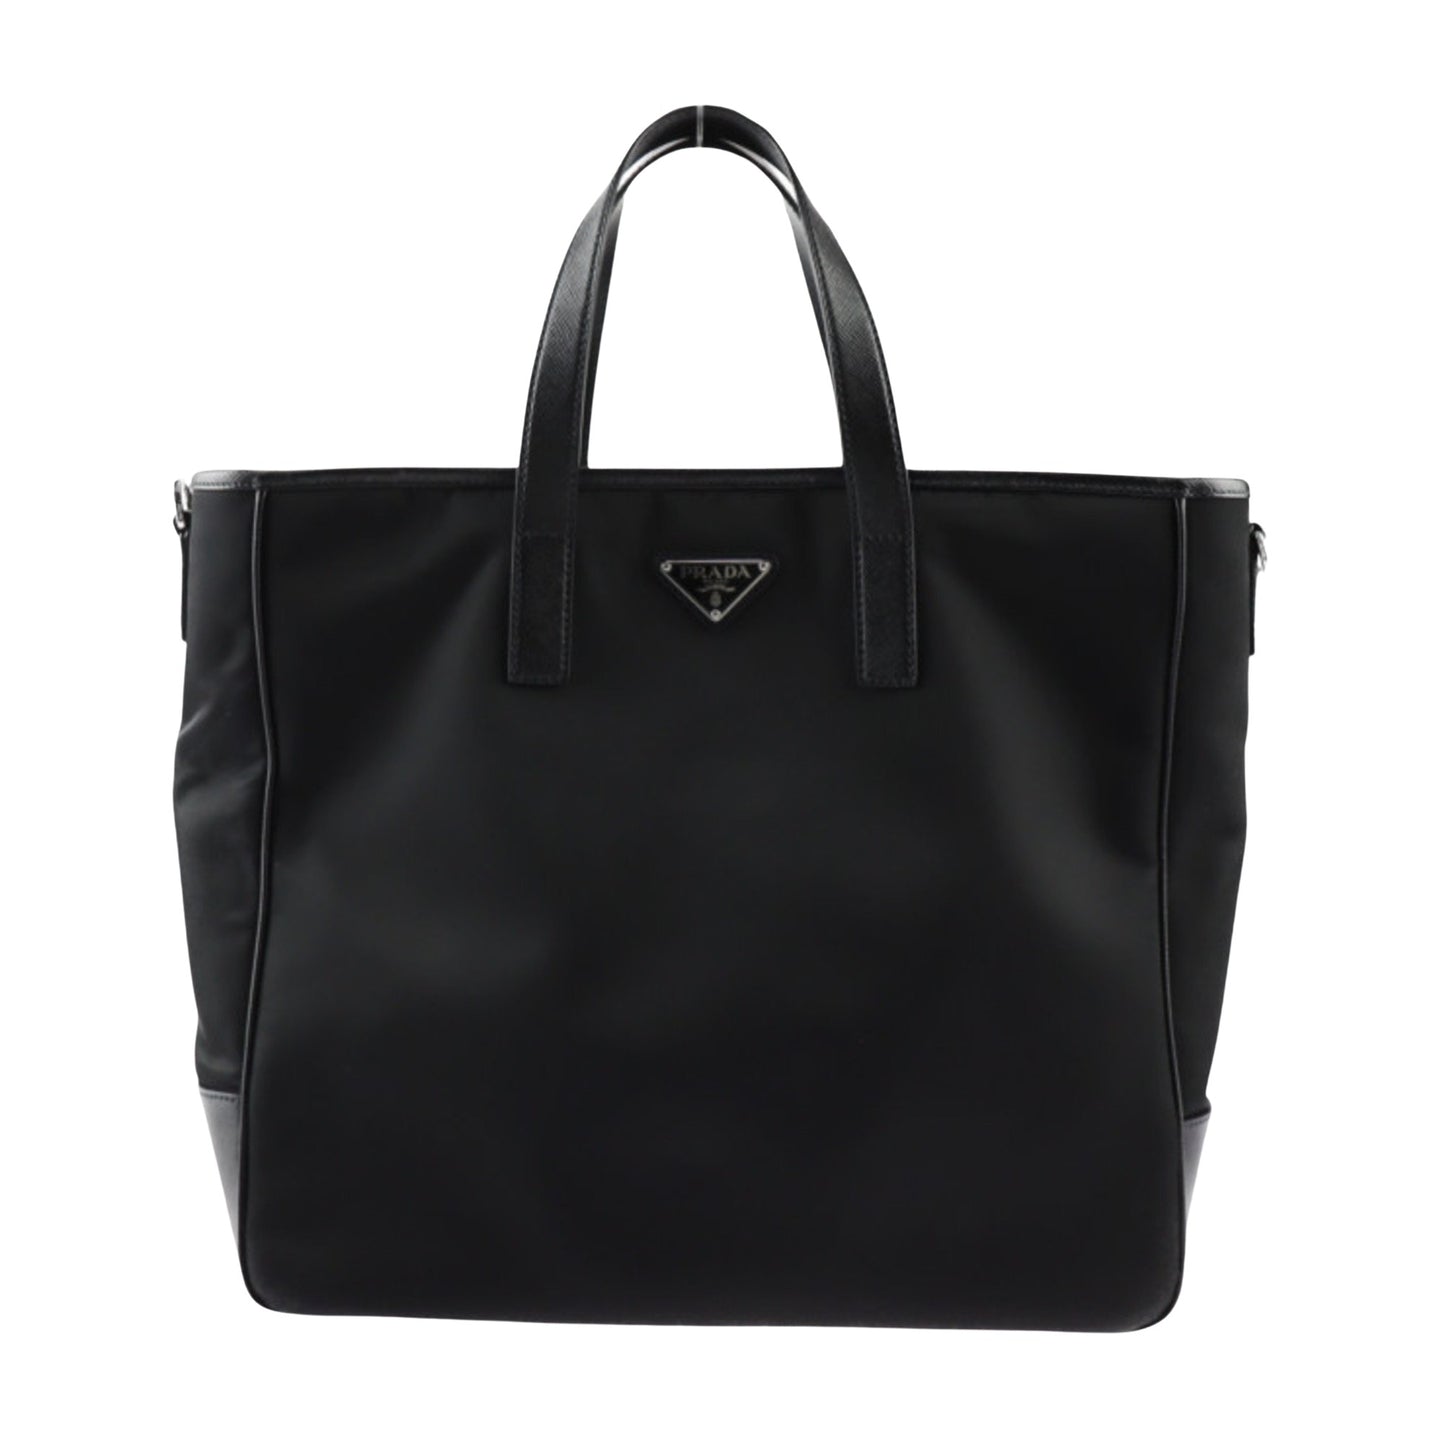 Prada Women's Contemporary Black Tote Bag for Ethical Fashion in Black